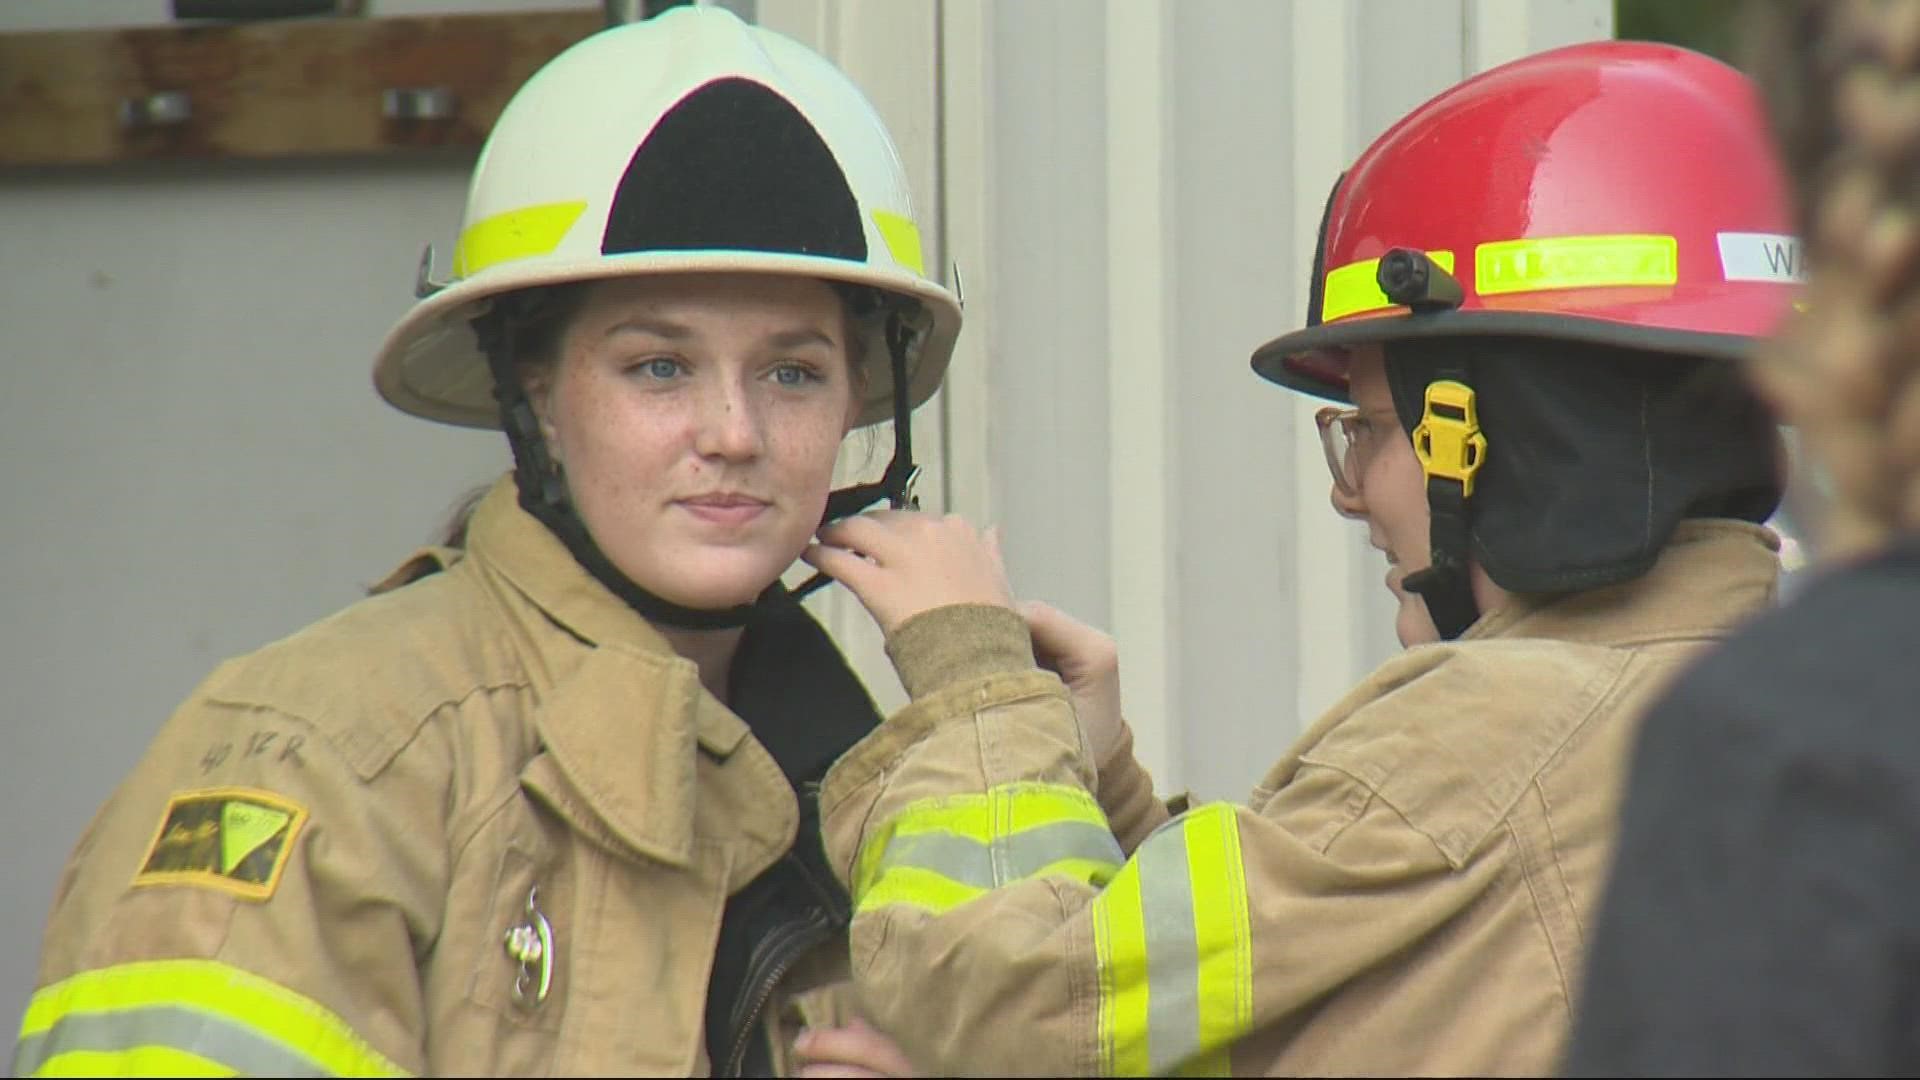 Less than 5% of career firefighters are women, but the Portland Metro Fire Camp is working to make the profession more diverse.